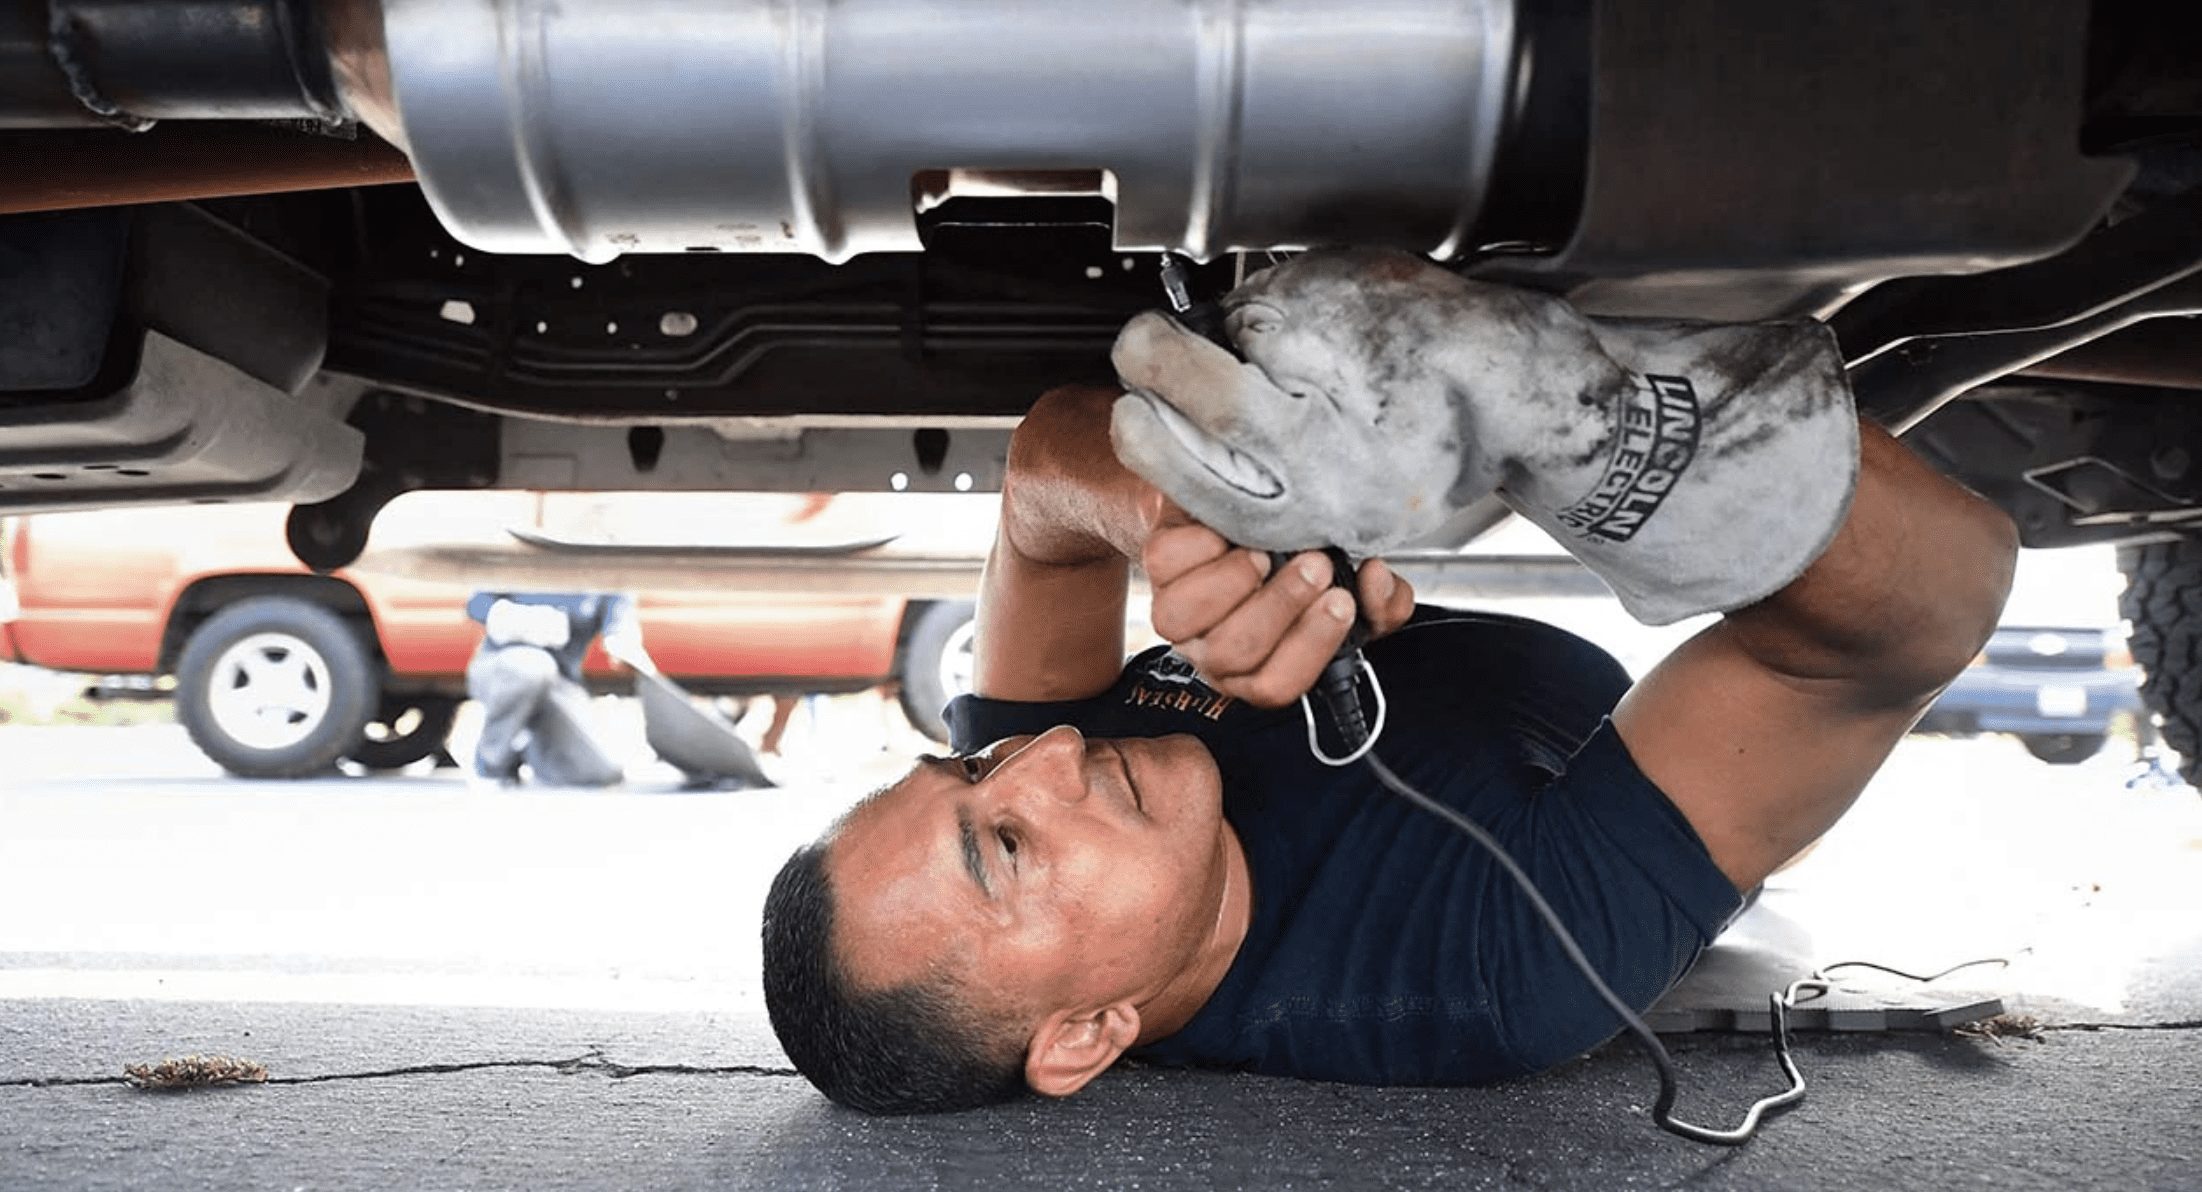 Catalytic Converter Thefts Claims Increased Over 5,000%, Dallas Number 3